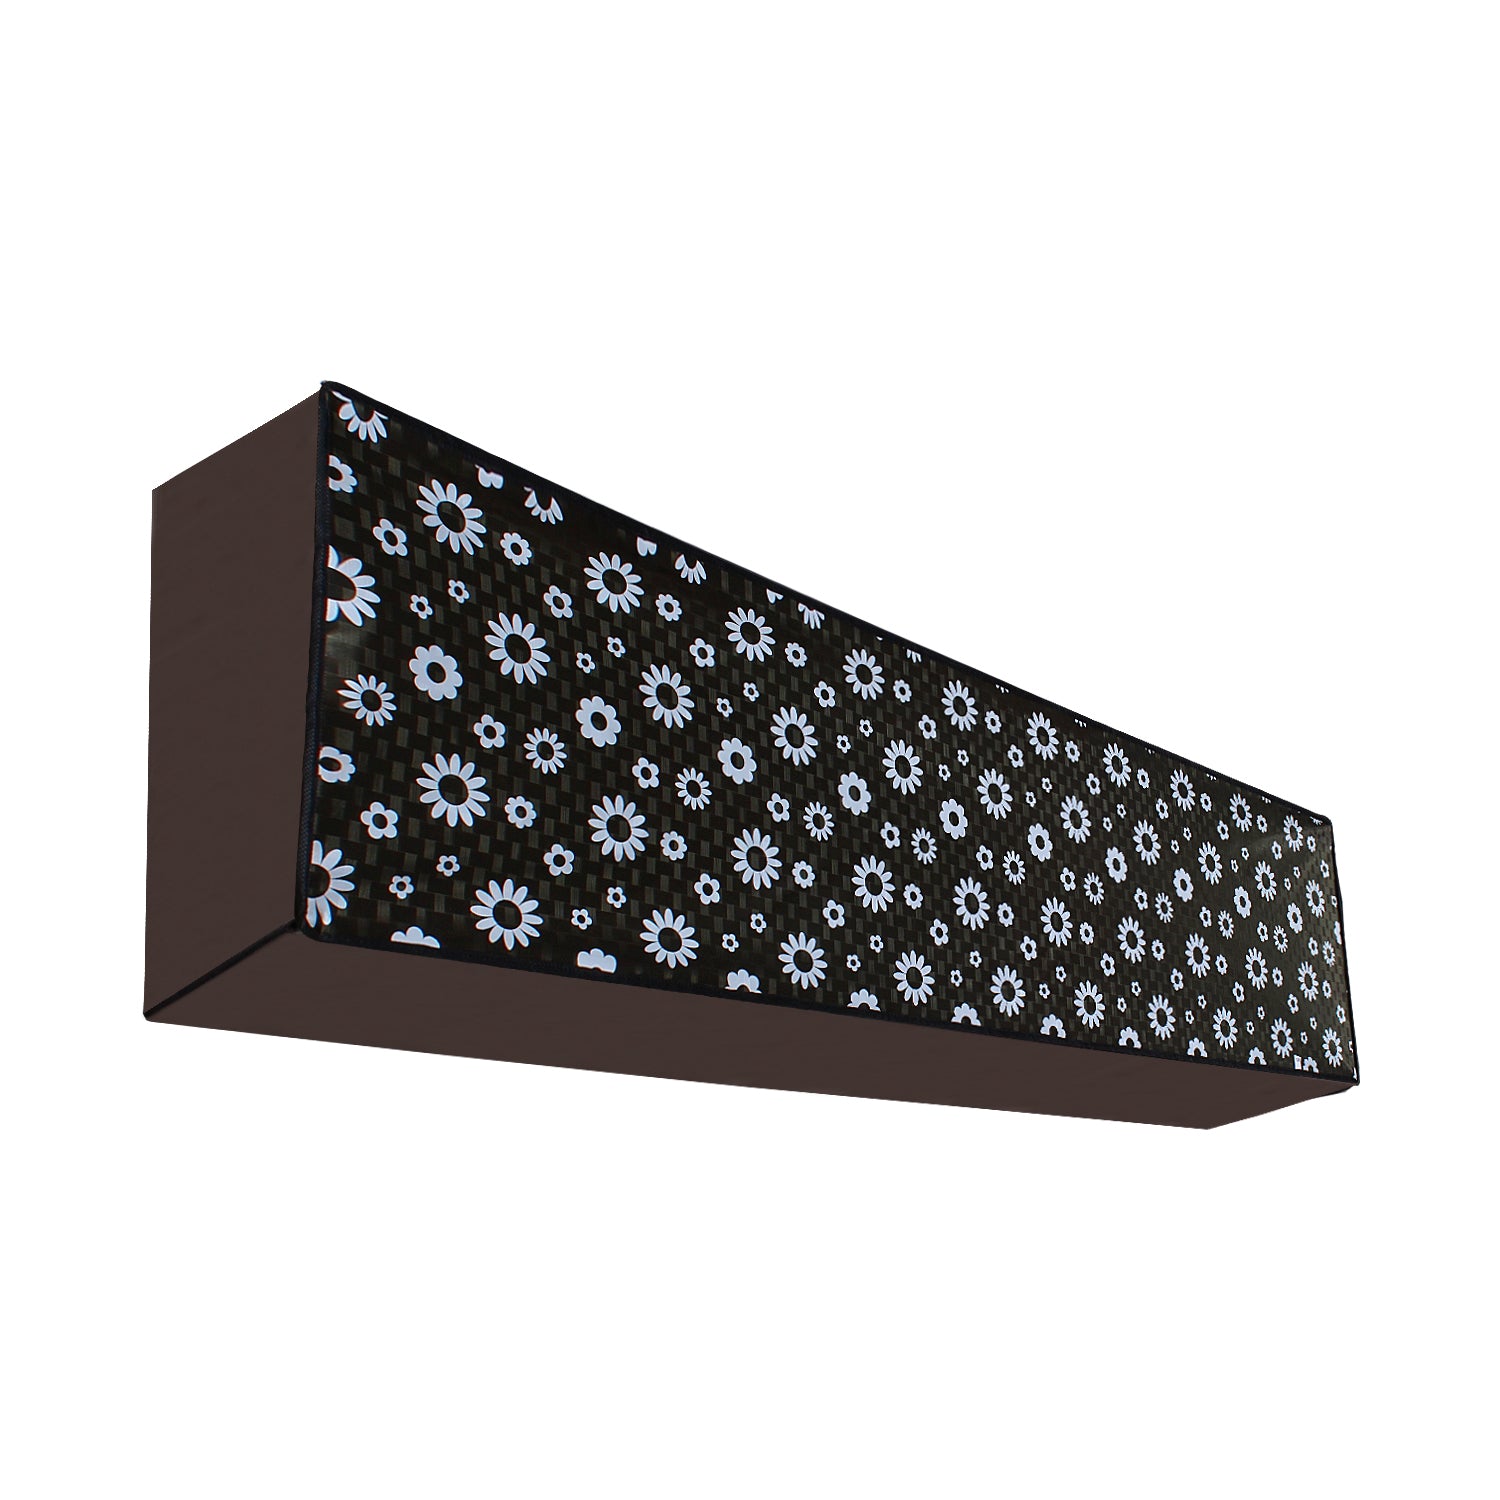 Waterproof and Dustproof Split Indoor AC Cover, SA52 - Dream Care Furnishings Private Limited